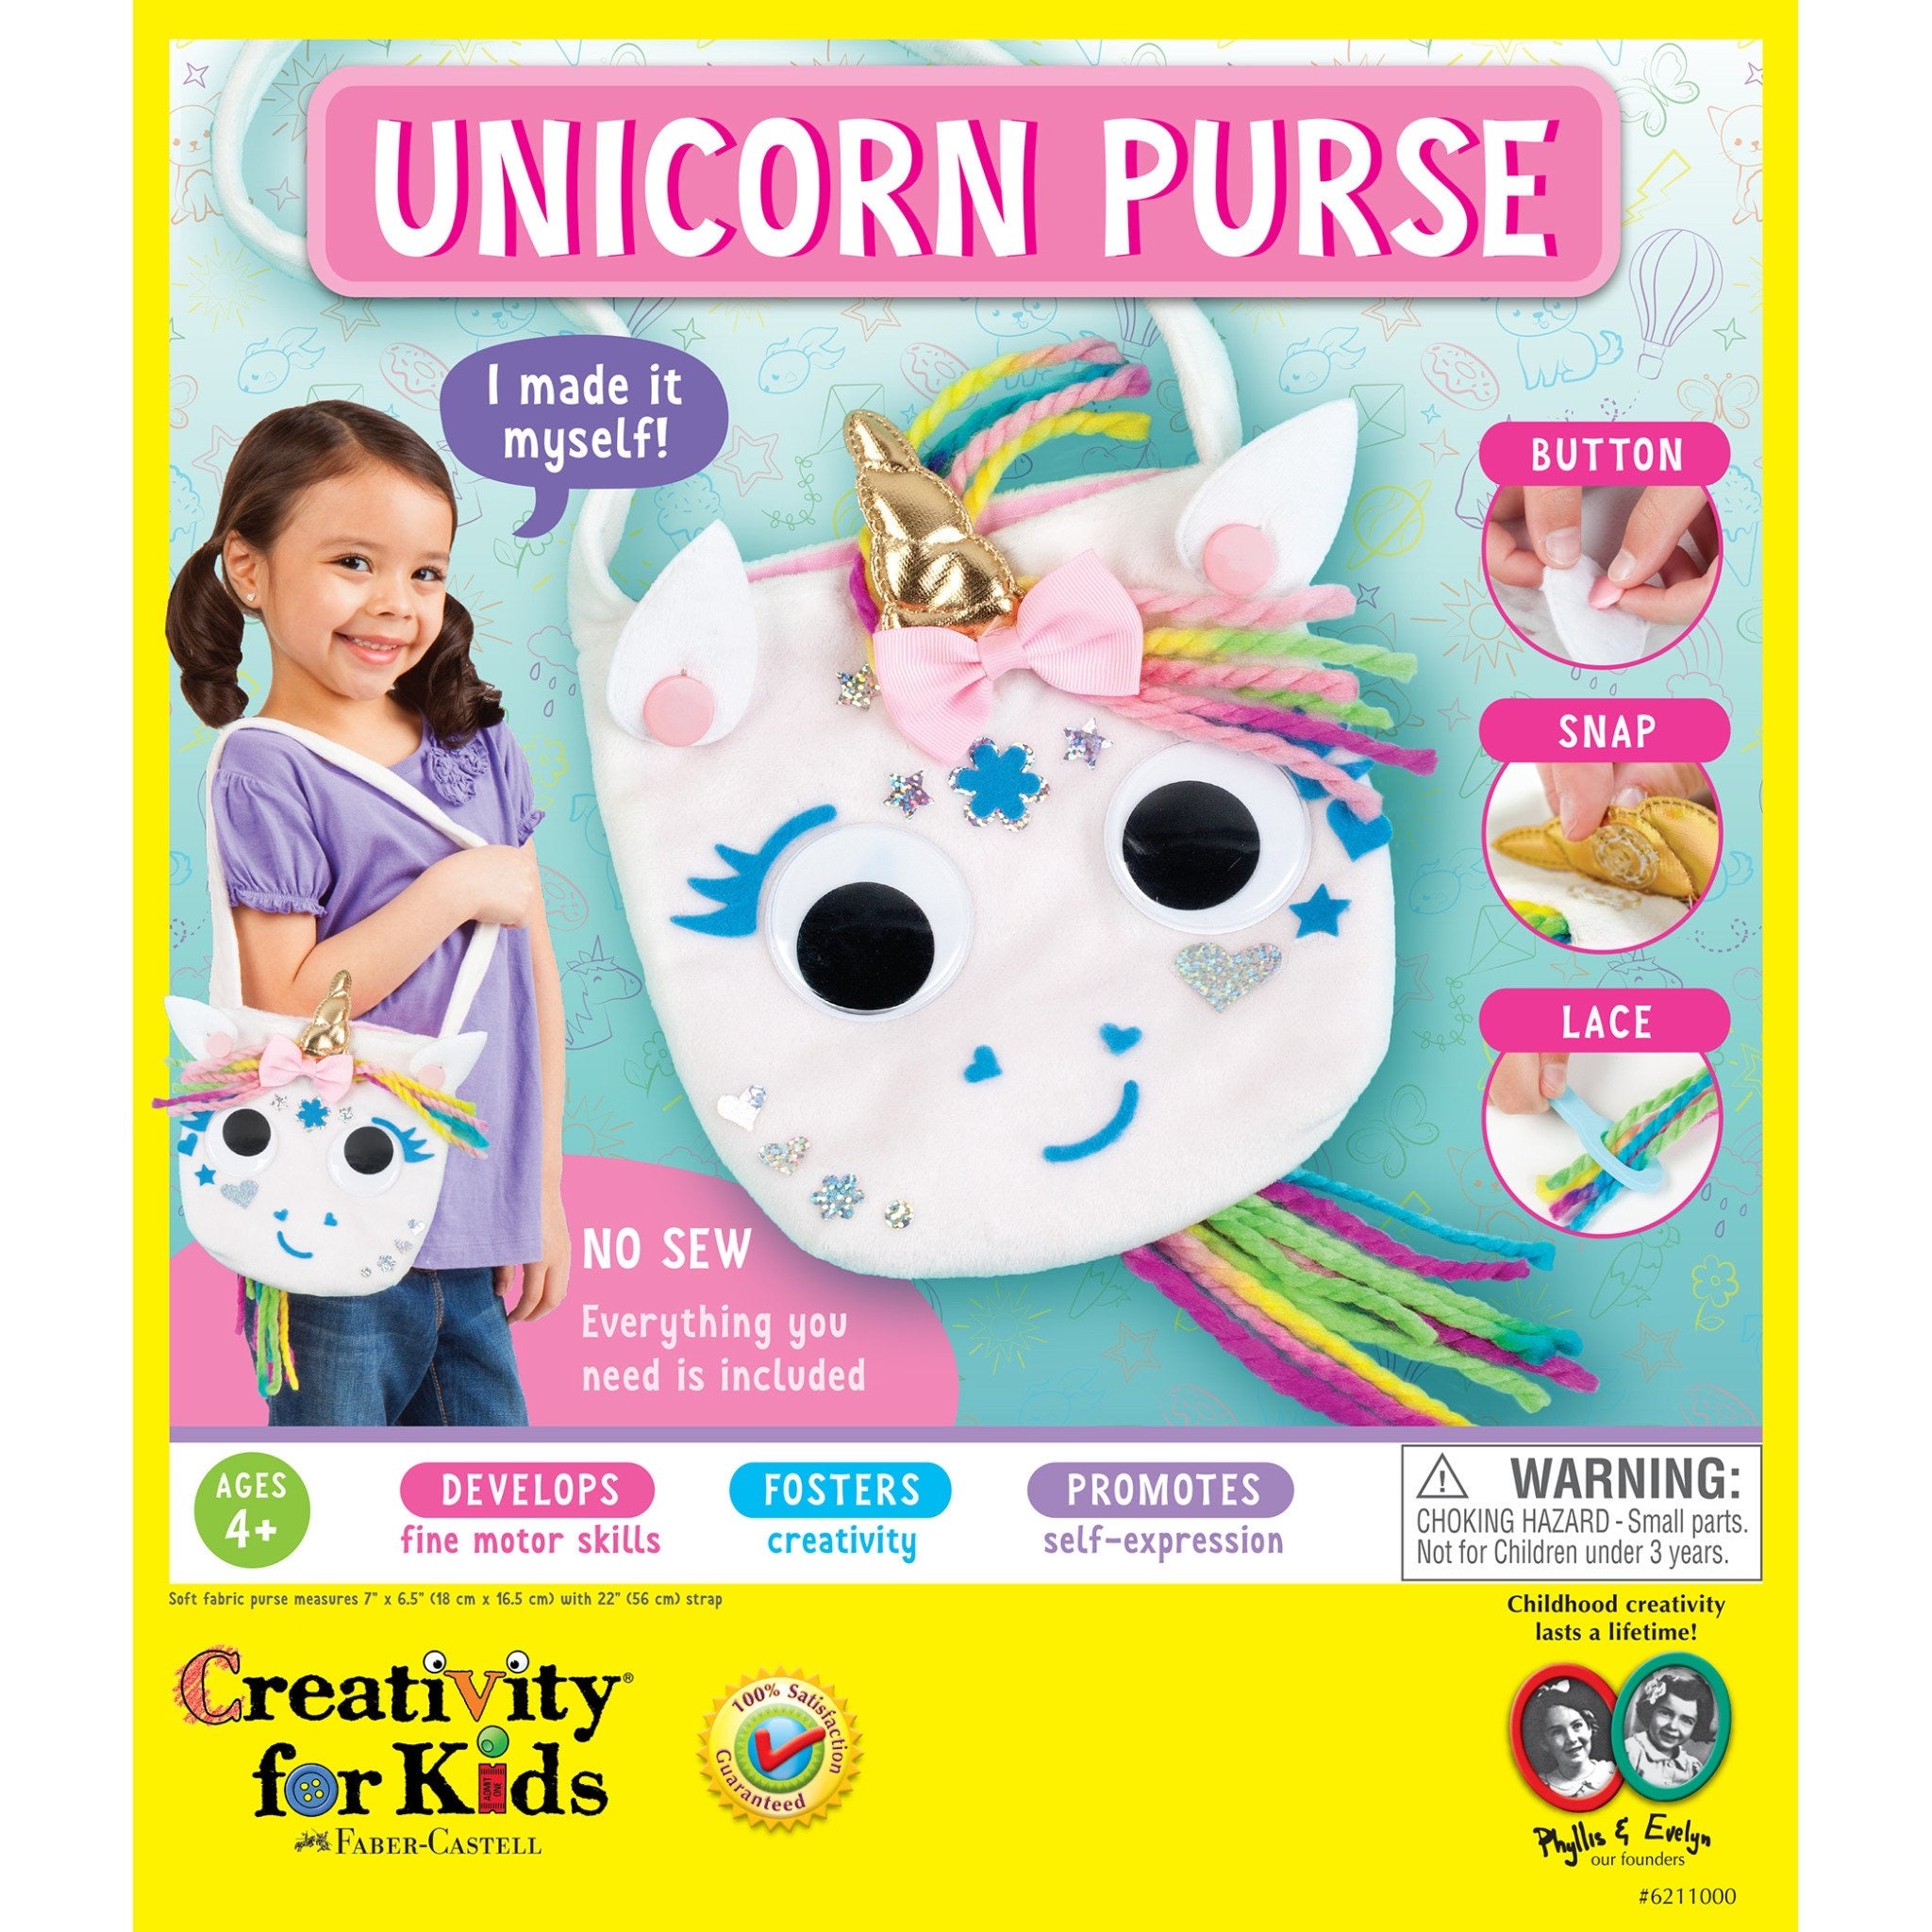 Make Your Own Unicorn Purse by Faber-Castell #6211000